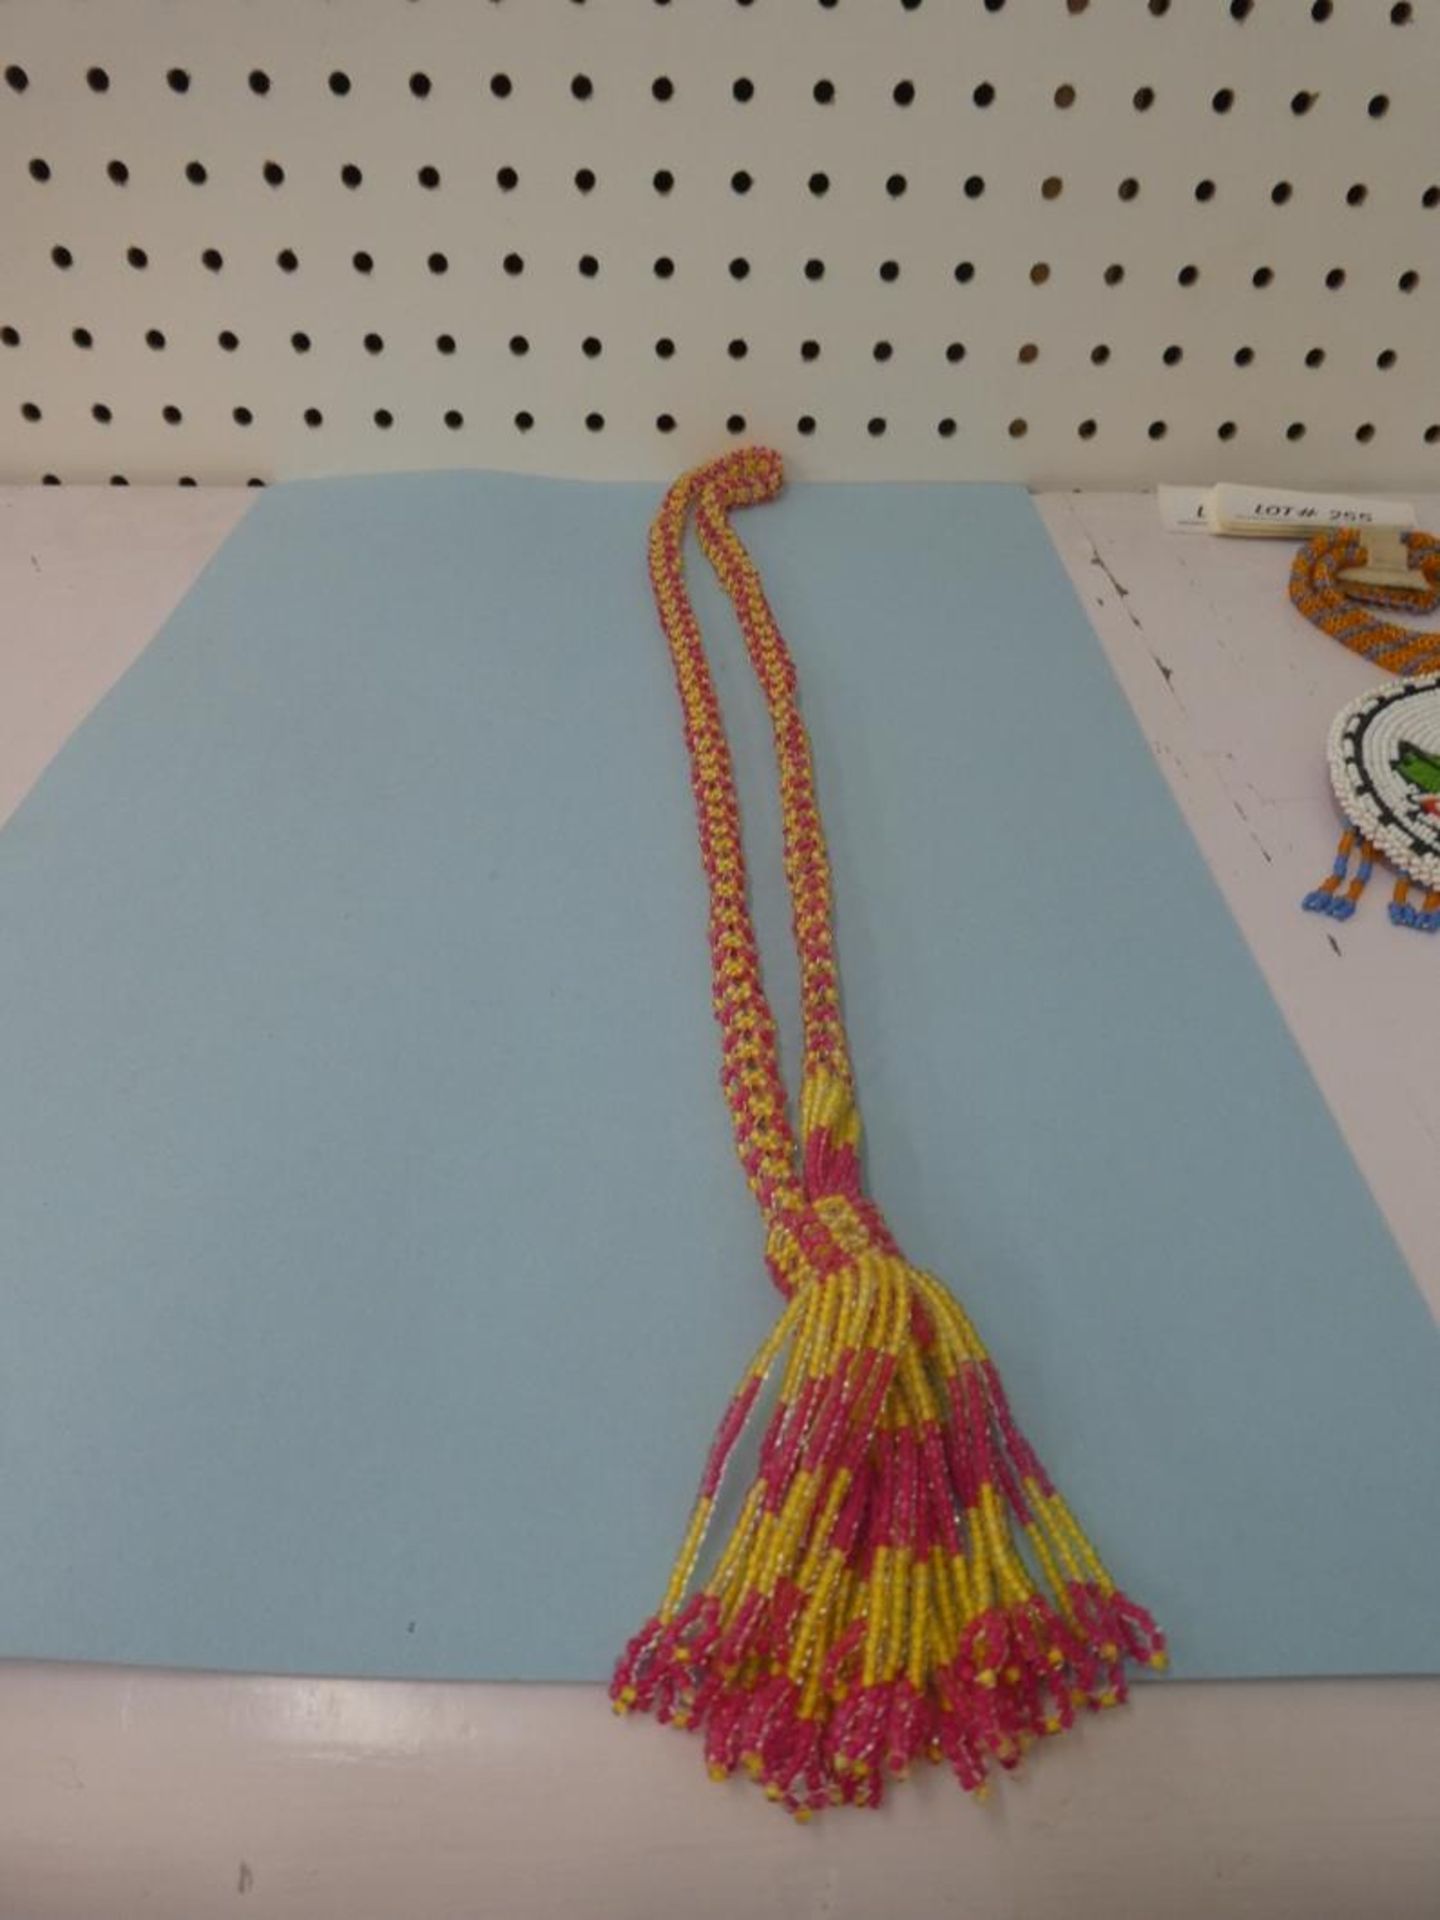 NATIVE MADE BEADED NECKLACE, BOLO TIE & COASTER - Image 4 of 4